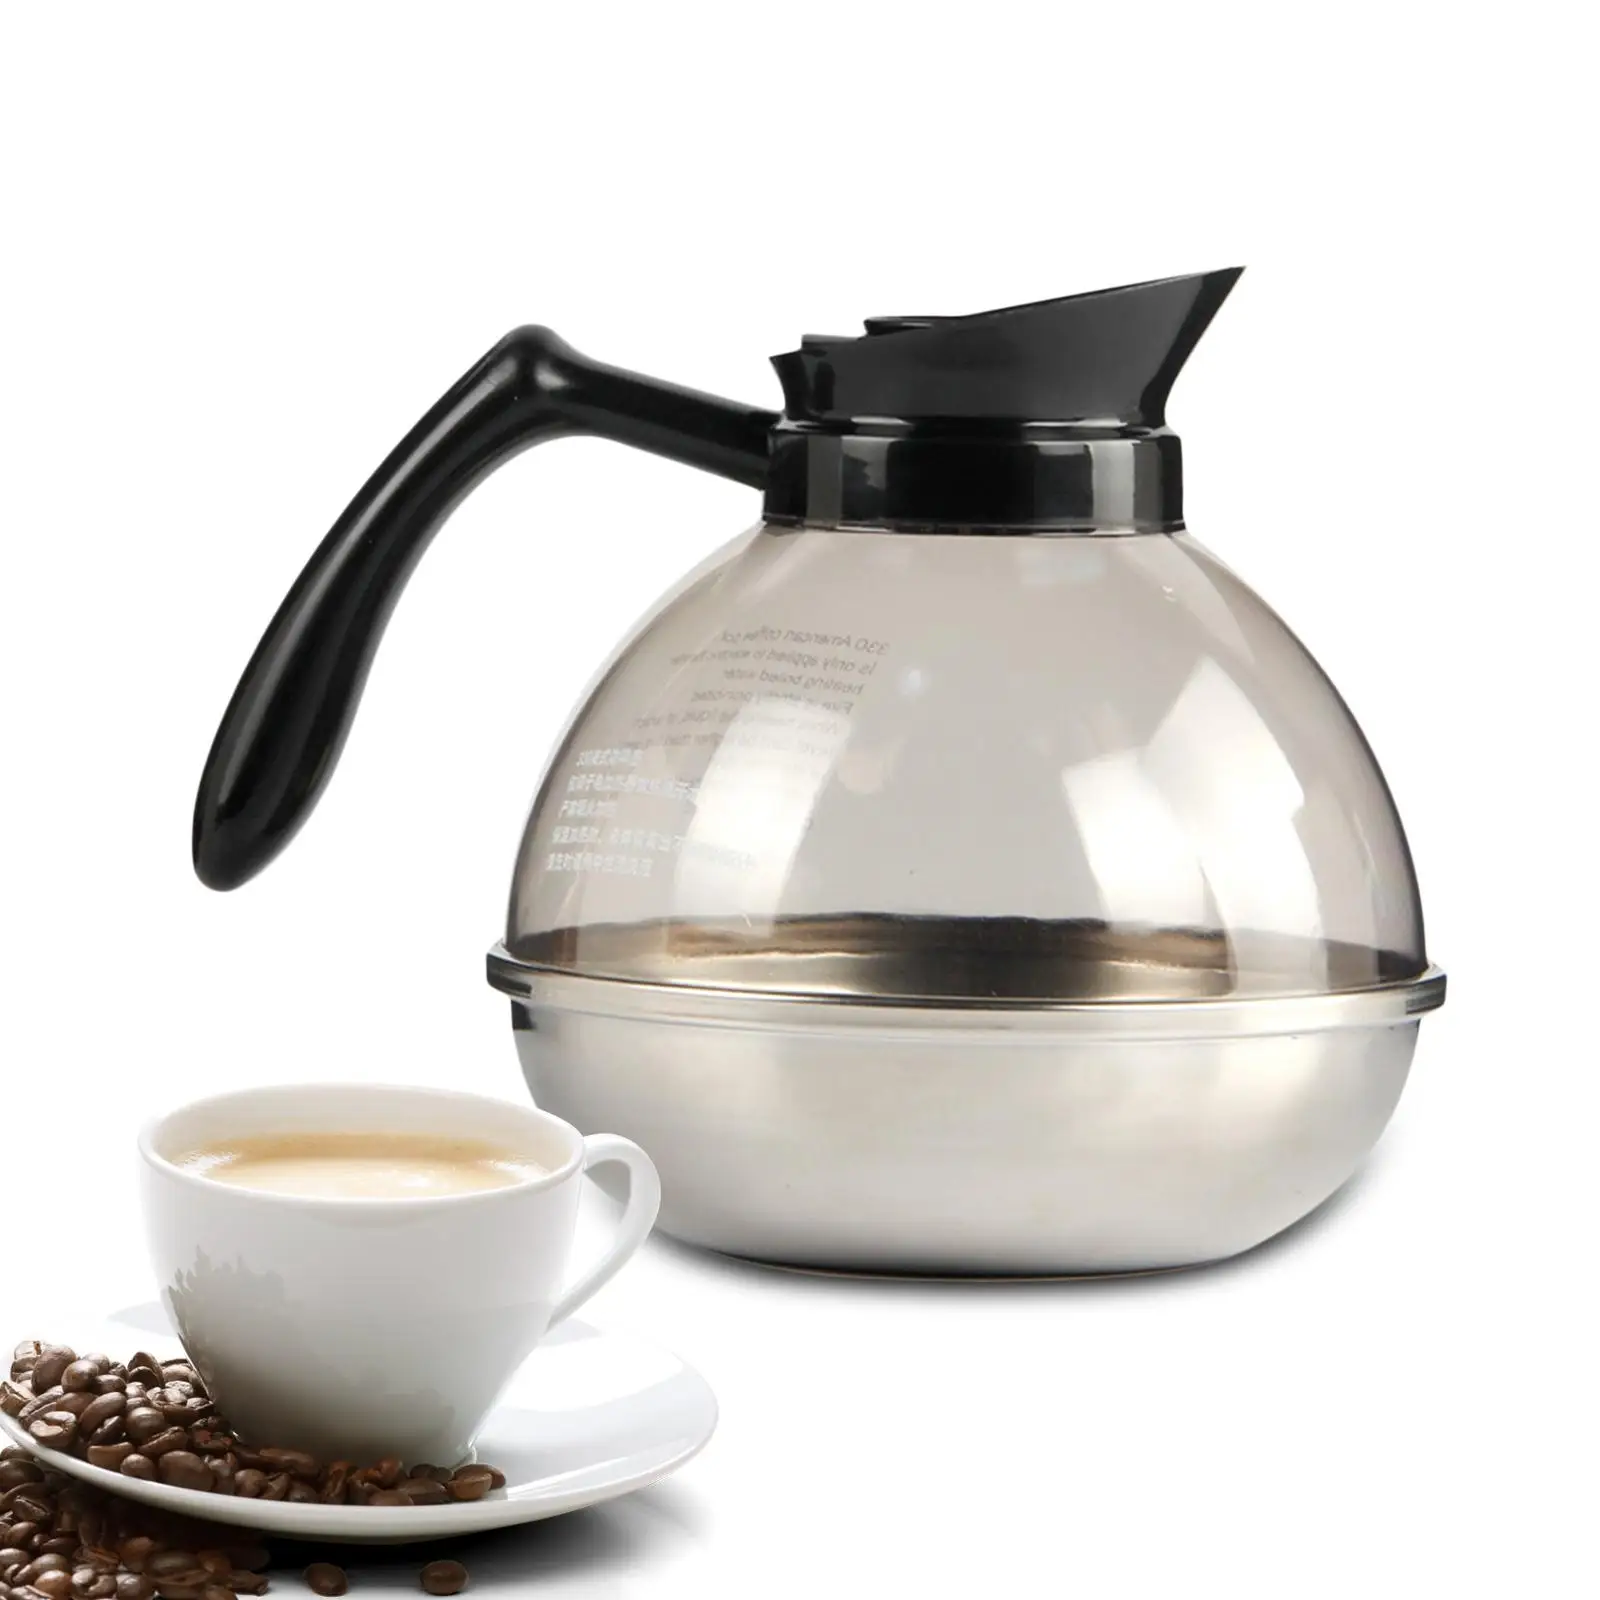 Household Coffee Decanter Heat Resistant -Coffee Carafe- Tea Kettle Coffee Kettle Gifts for Coffee Lovers